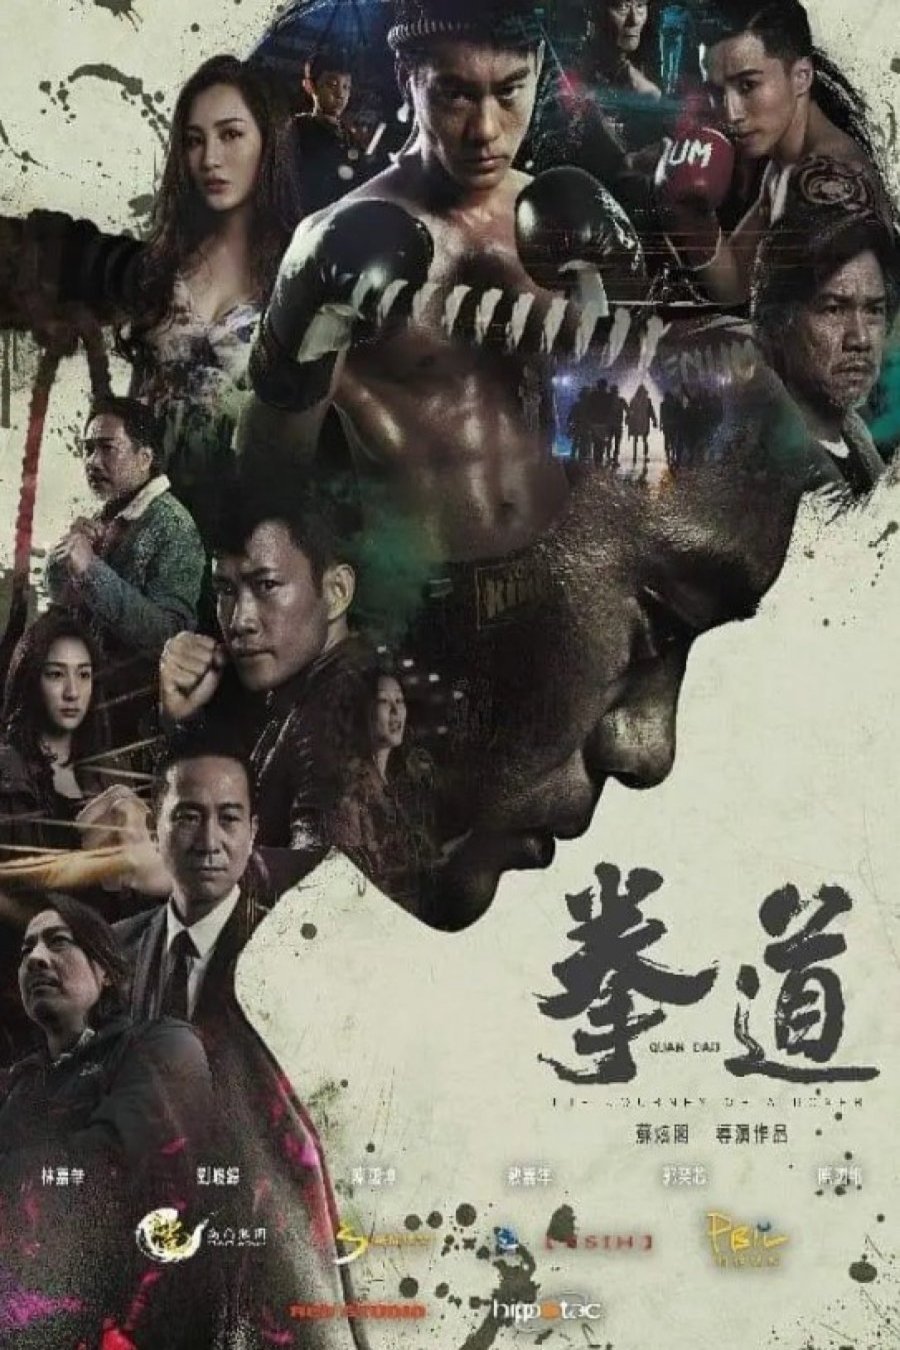 Chinese poster of the movie Quan Dao: The Journey of a Boxer